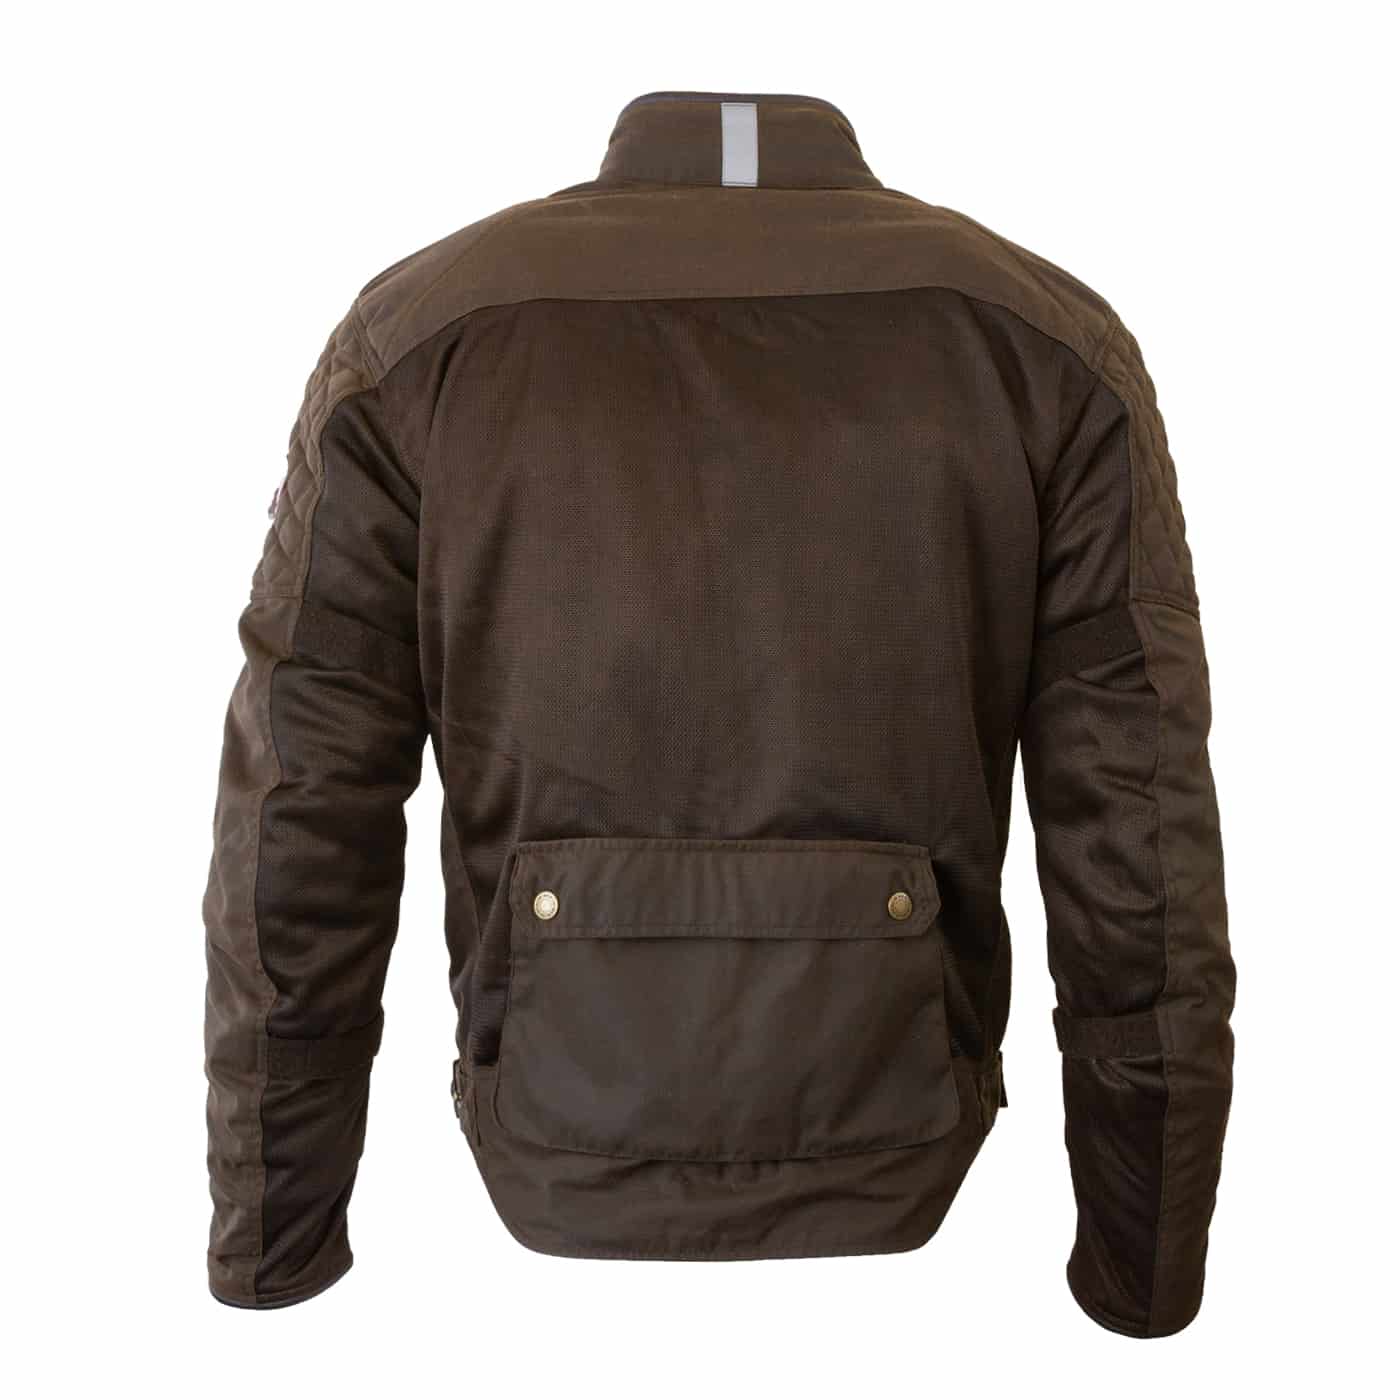 White background image of the back of Merlin Chigwell Utility waxed cotton jacket in brown